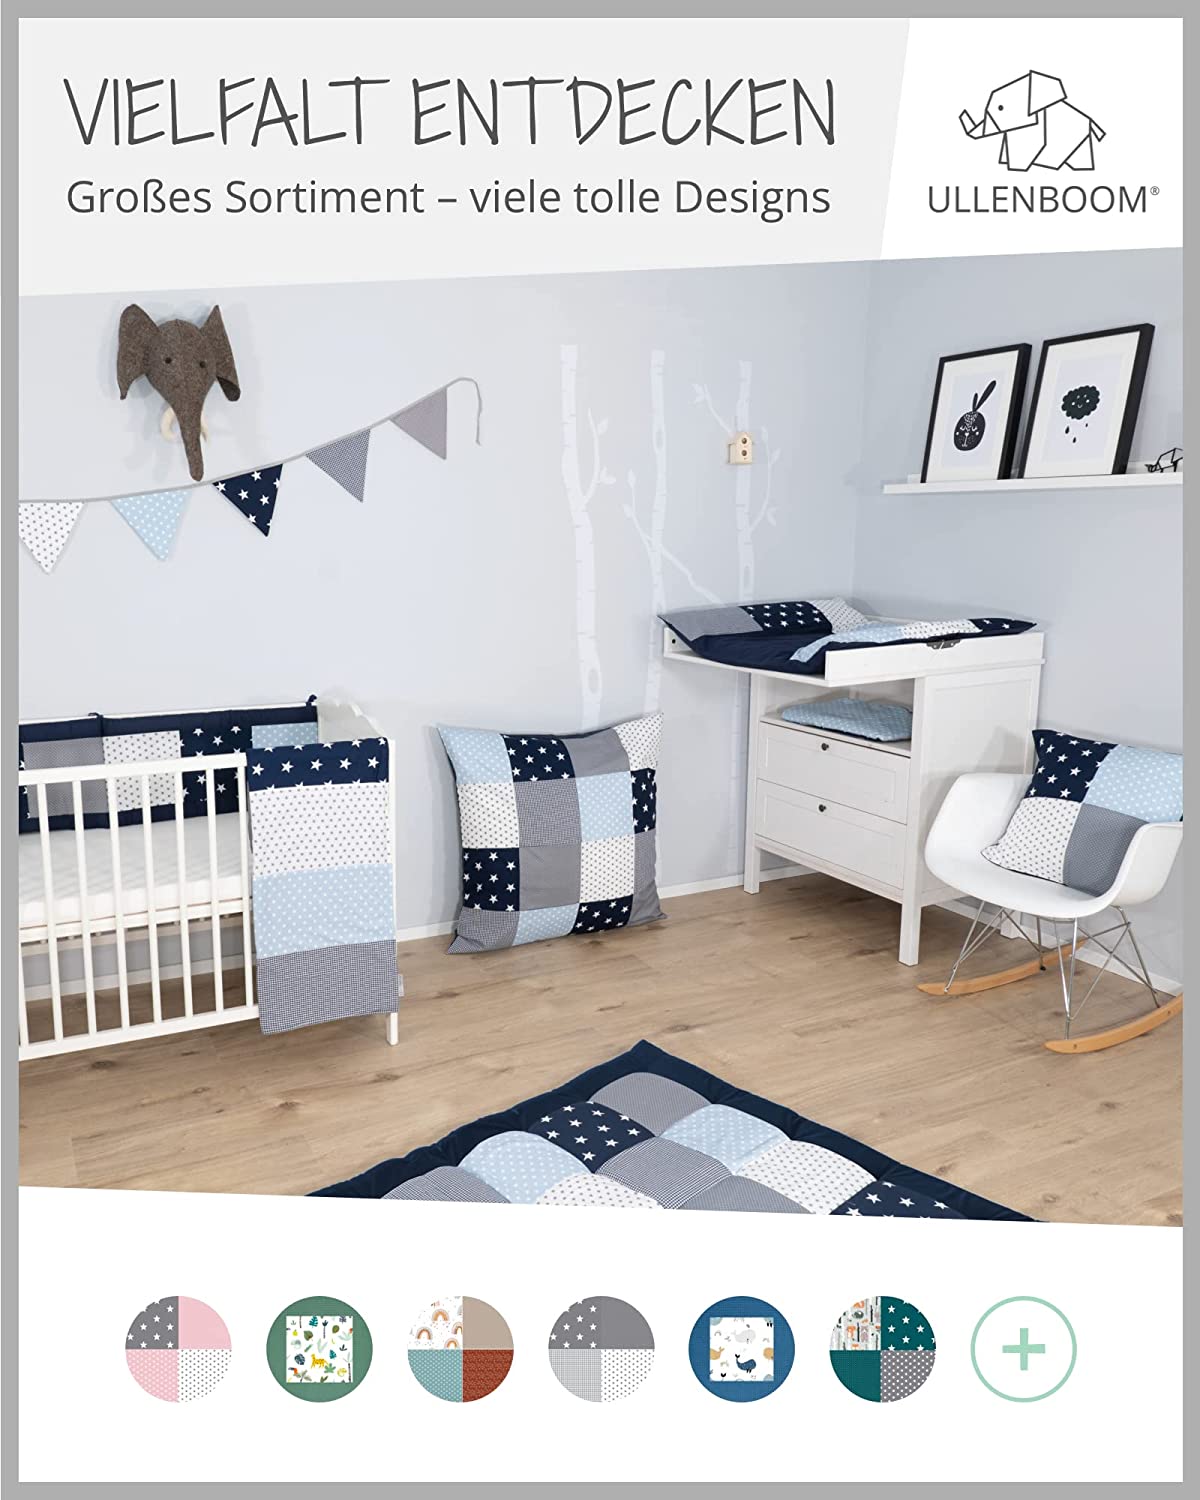 ULLENBOOM ® Baby Crawling Blanket 140 x 140 cm Padded Blue Light Blue Grey (Made in EU) – Crawling Blanket for Baby with 100% Oeko-Tex Cotton, Ideal as a Baby Blanket and Play Blanket